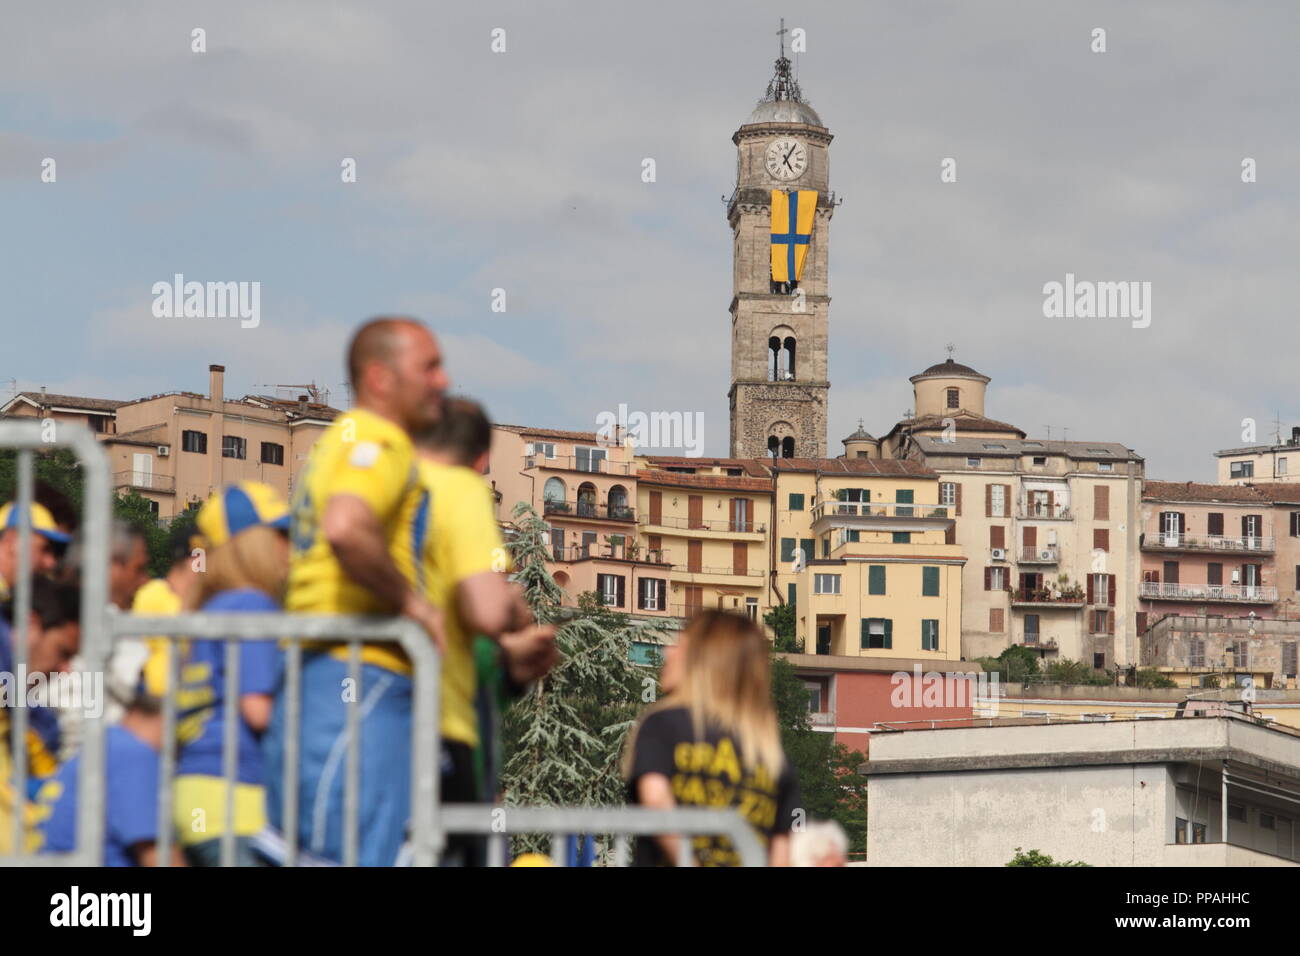 Frosinone / Italy - May 16, 2015: Canary fans at the stadium in the match that will promote the team in Serie A Stock Photo